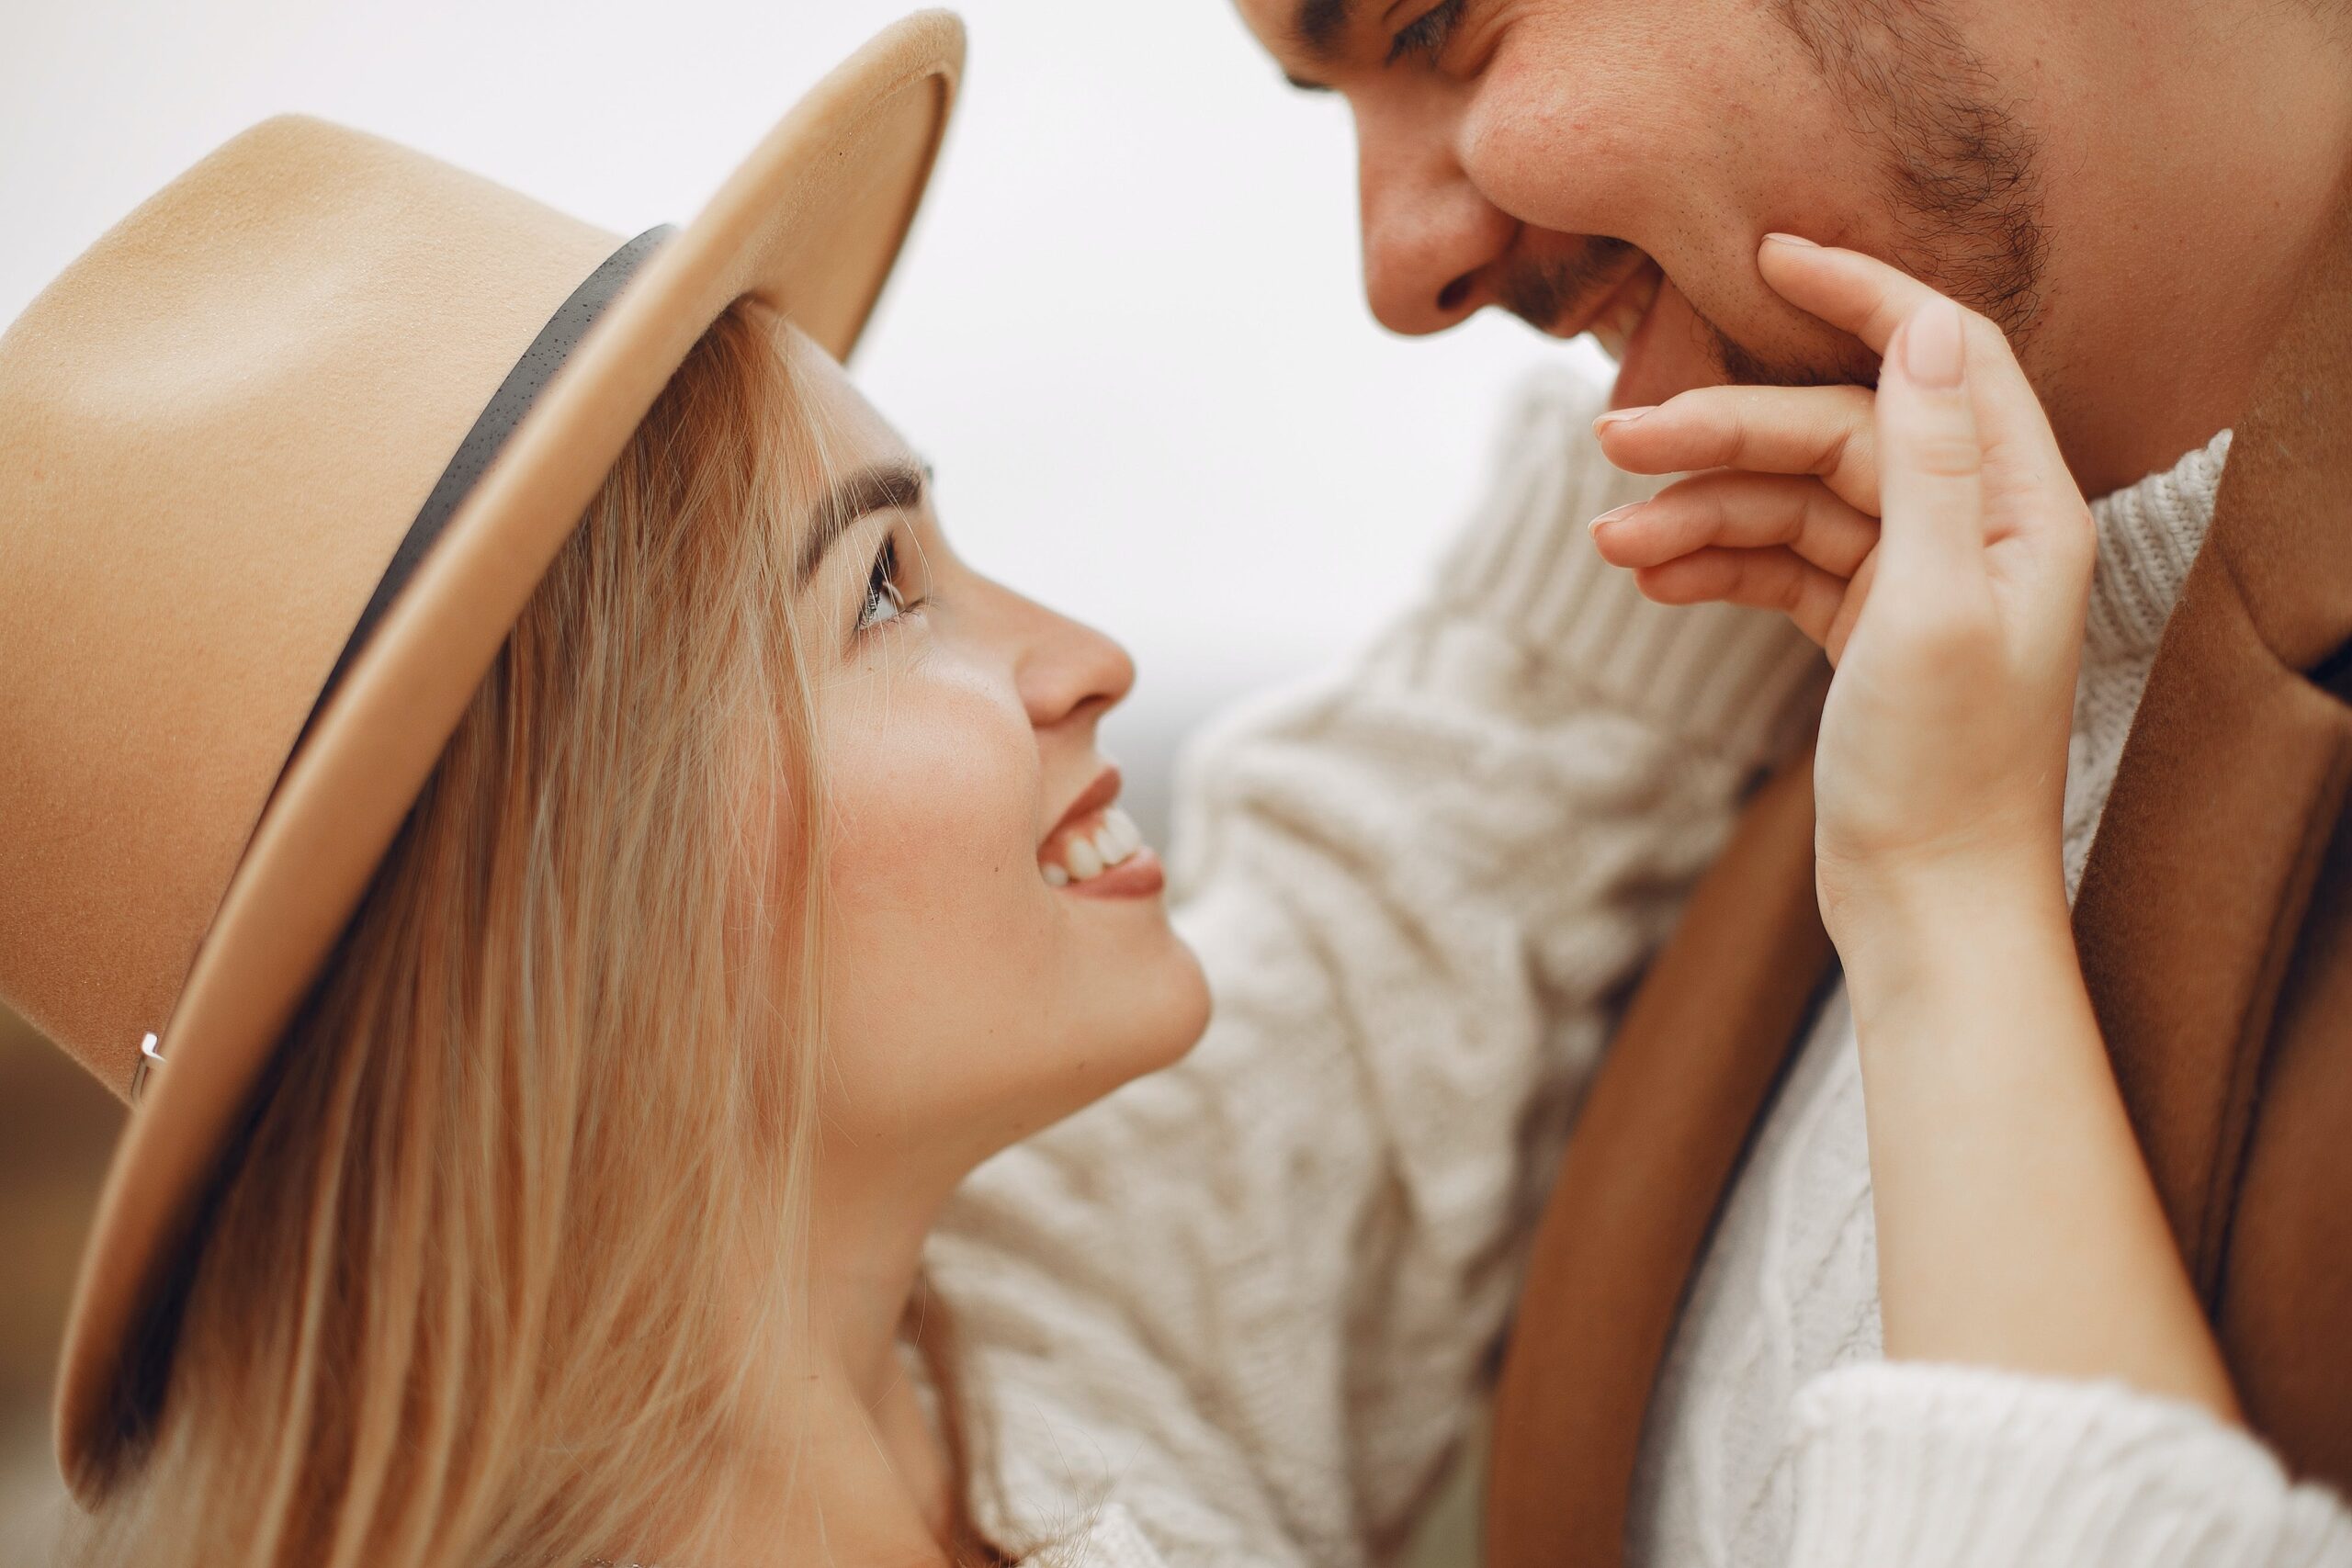 How To Enhance Intimacy In Relationships For Better Understanding